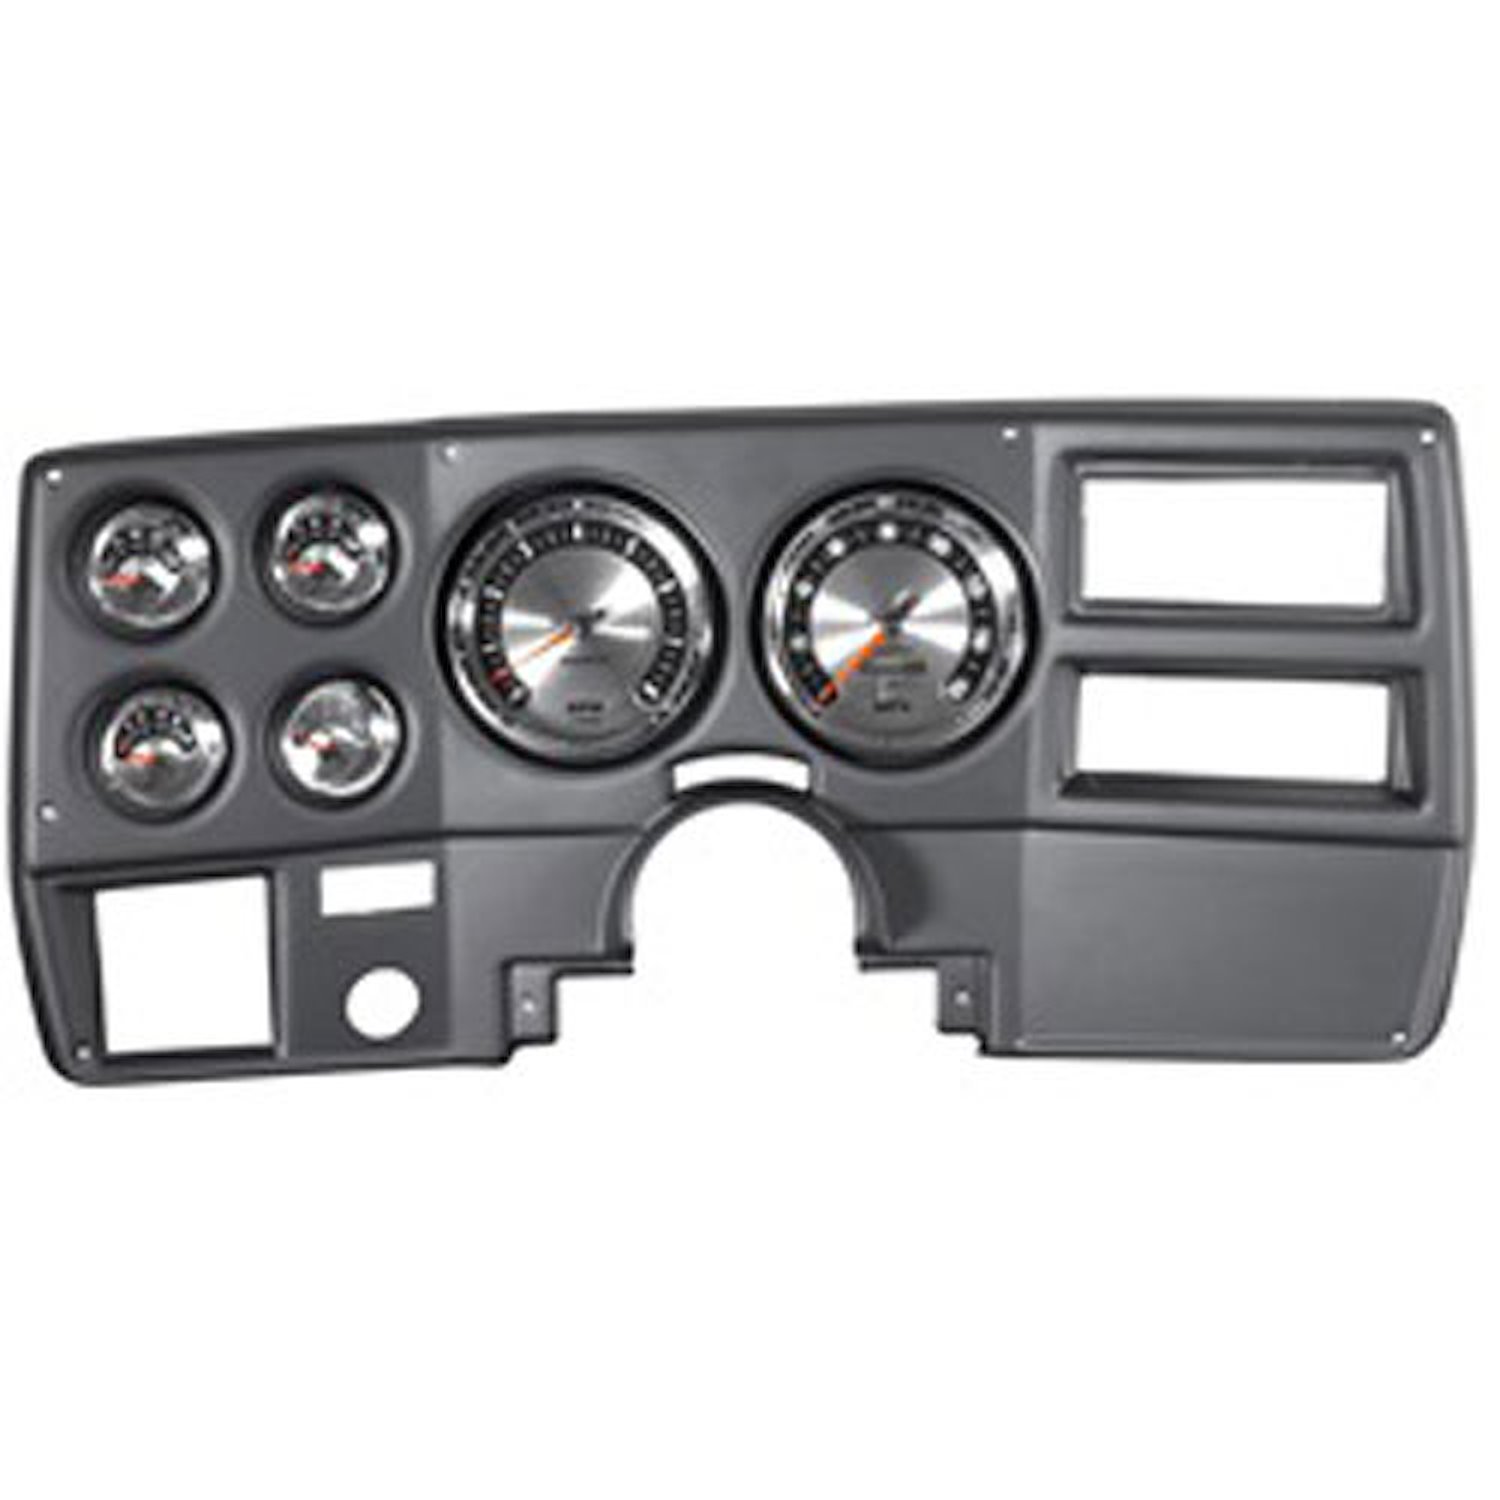 American Muscle 6-Gauge Dash Kit 1973-83 Chevy Truck/Suburban Includes: